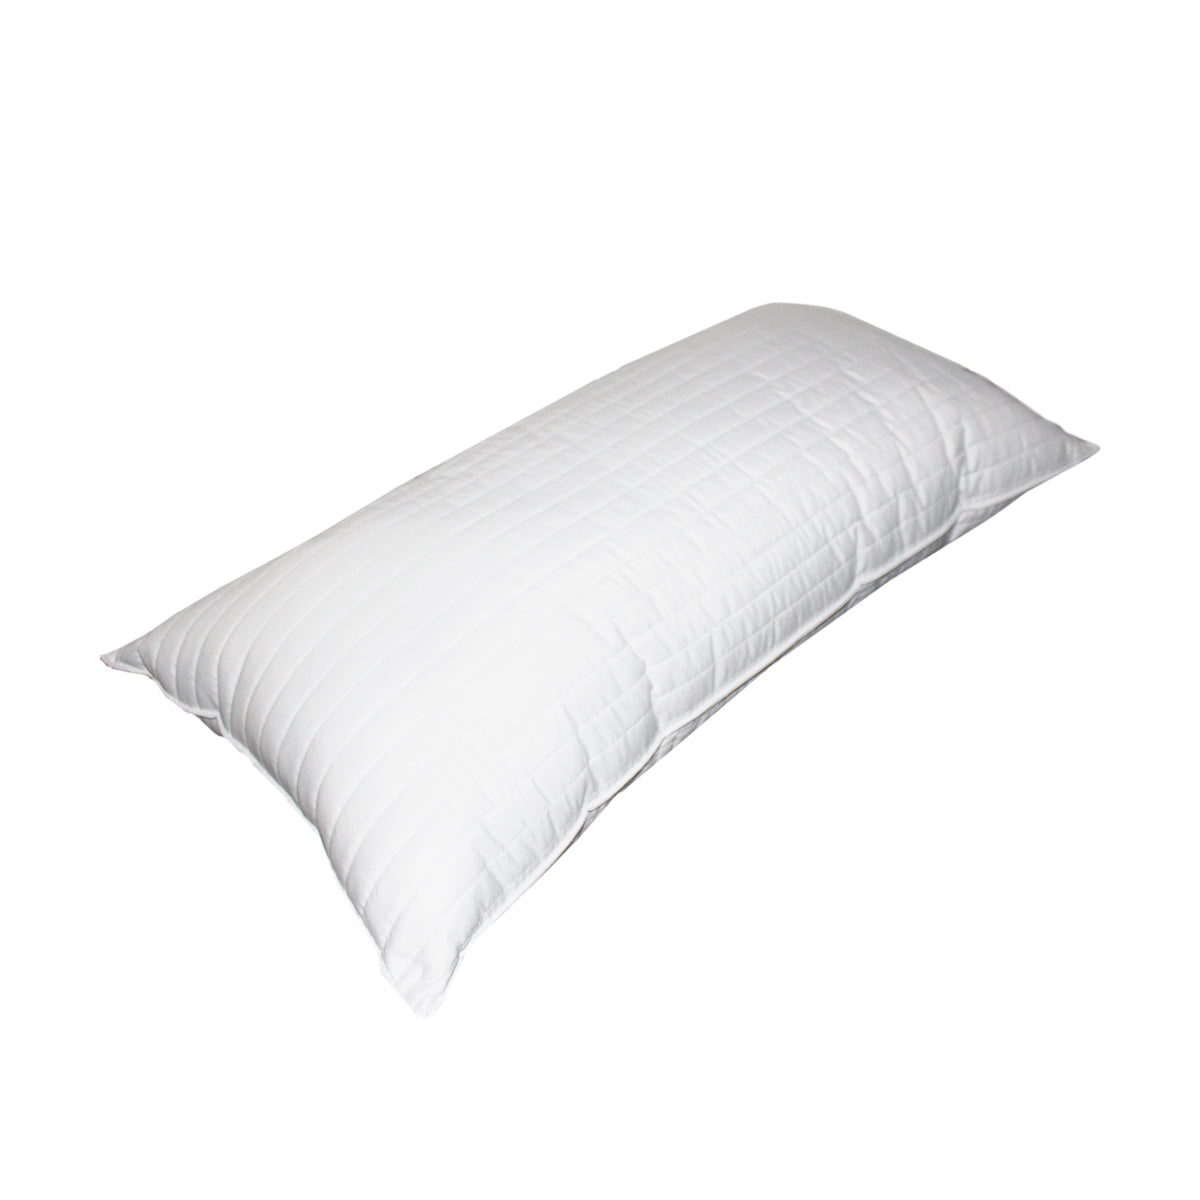 KING SIZE PILLOW WITH FIRM SUPPORT 9663